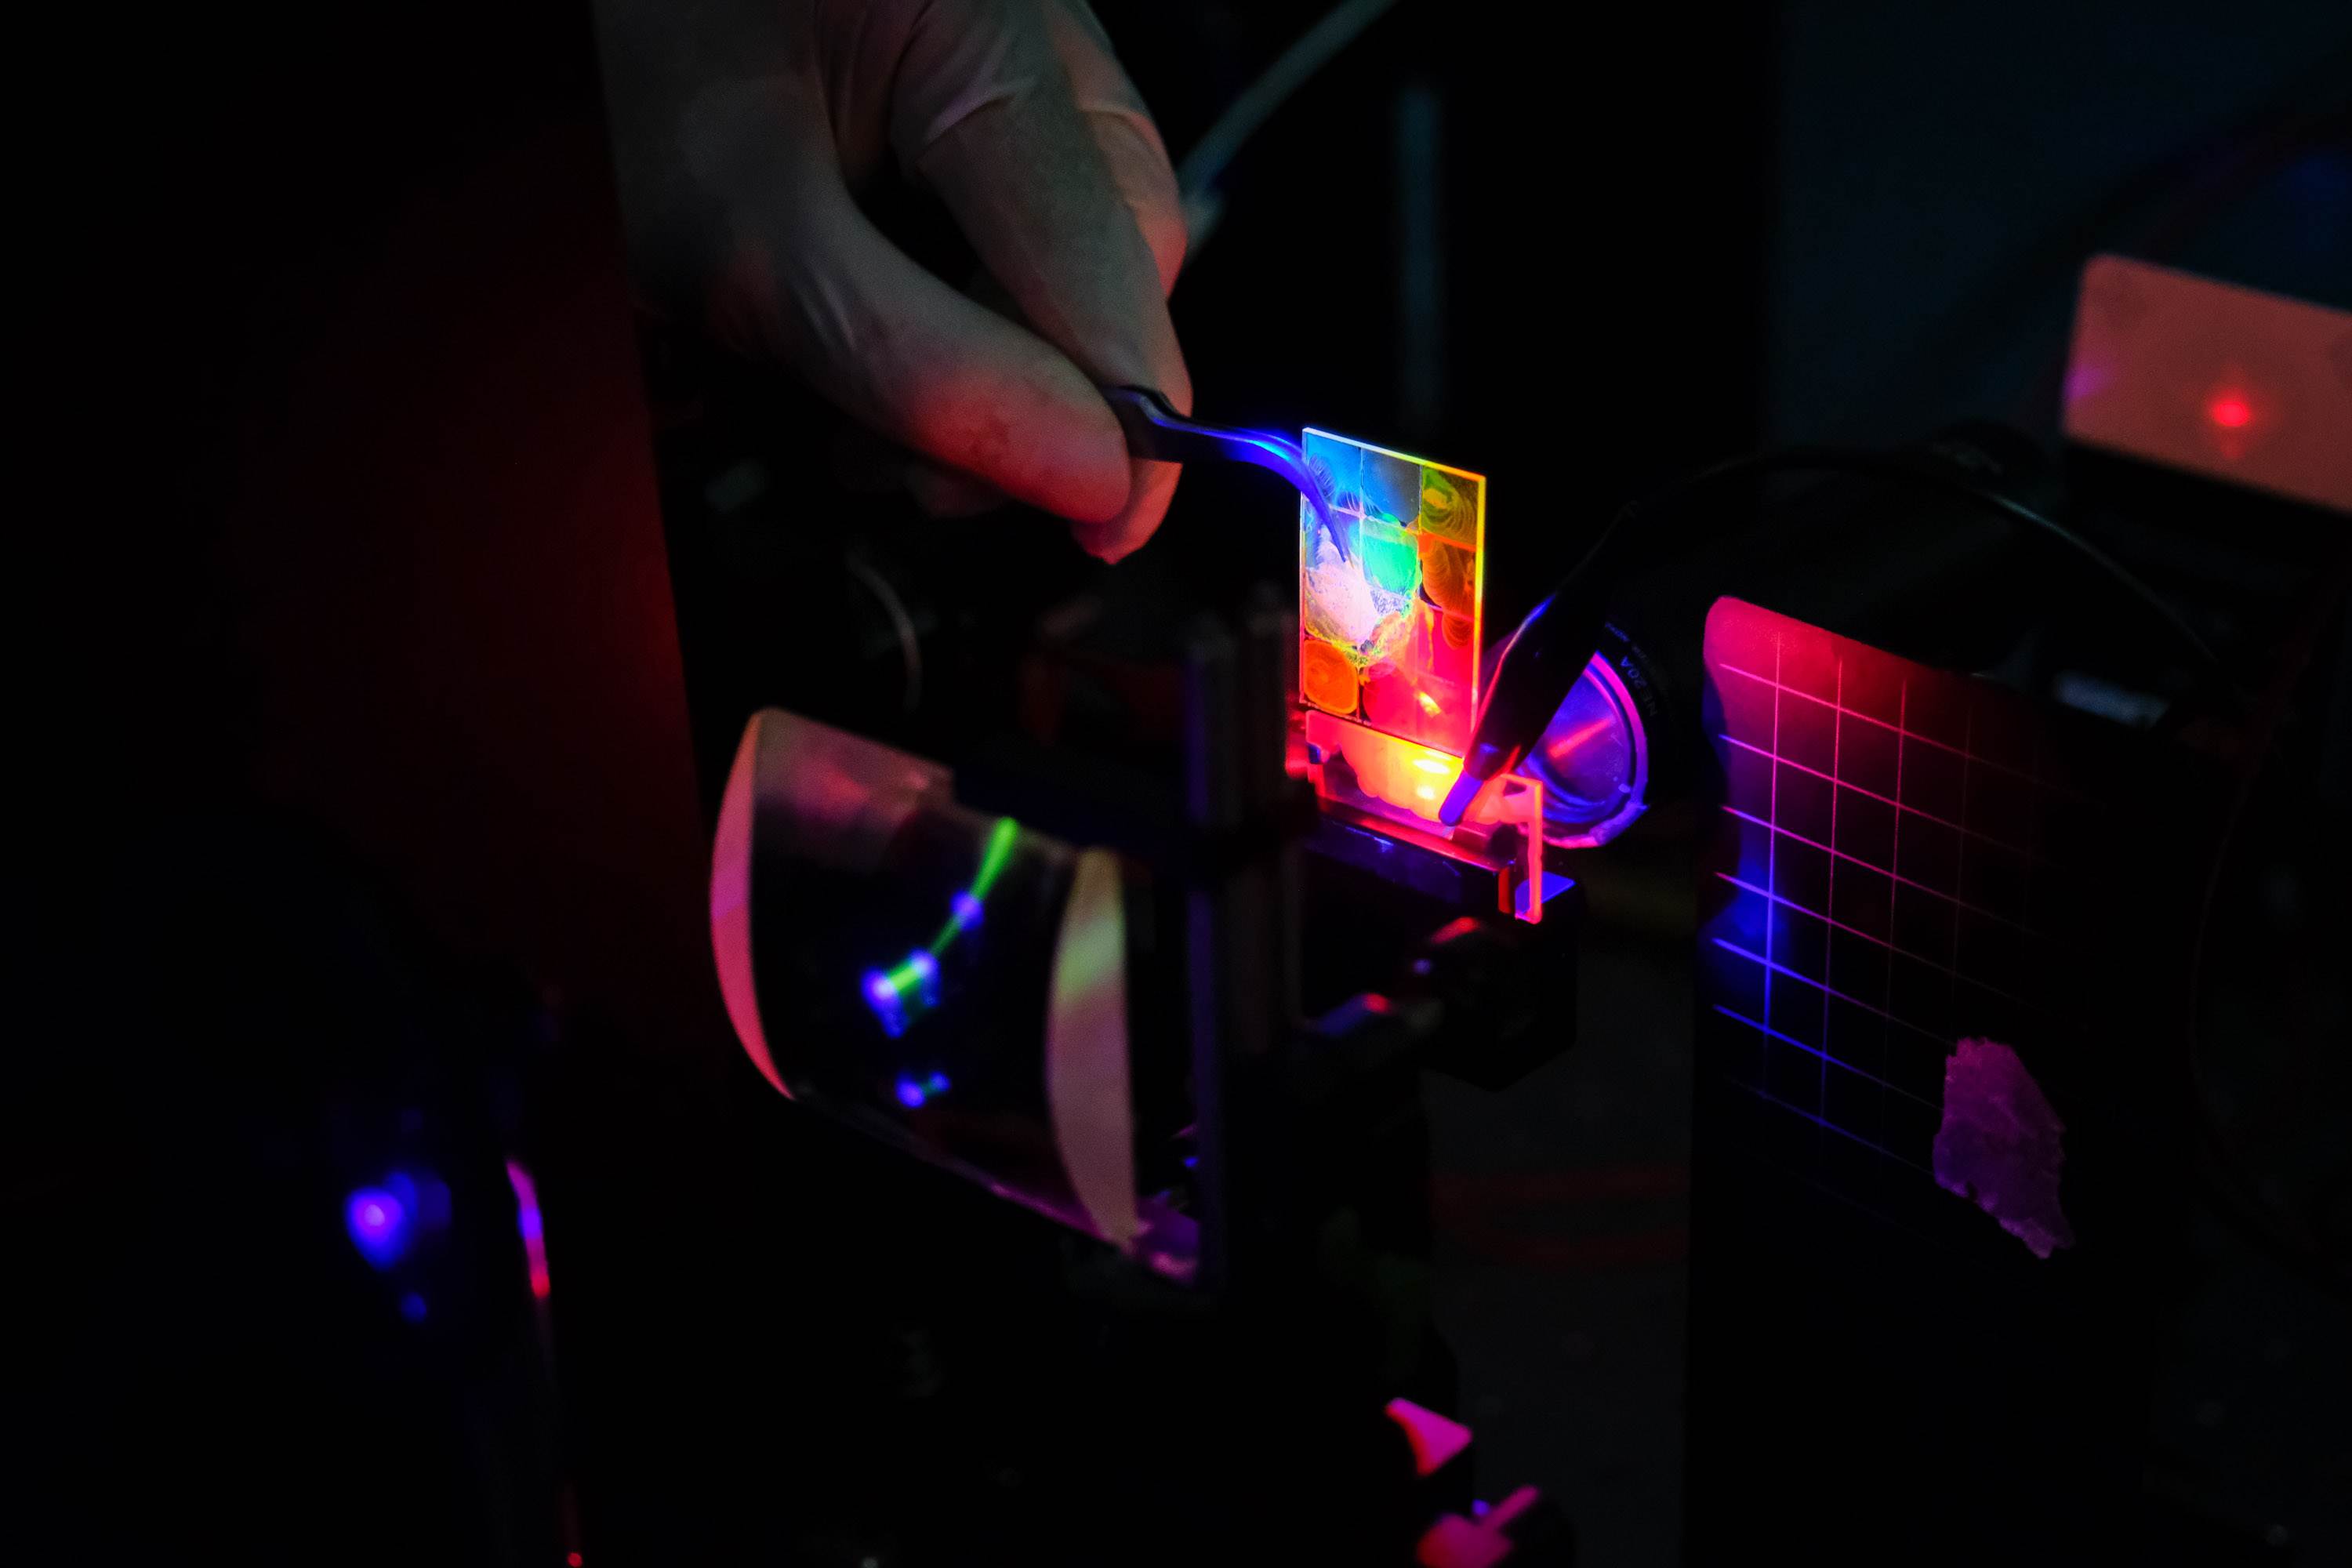 Glass plates with applied colloidal quantum dots which can emit different spectrums light when electrically and optically pumped, which makes it suitable as a laser material.